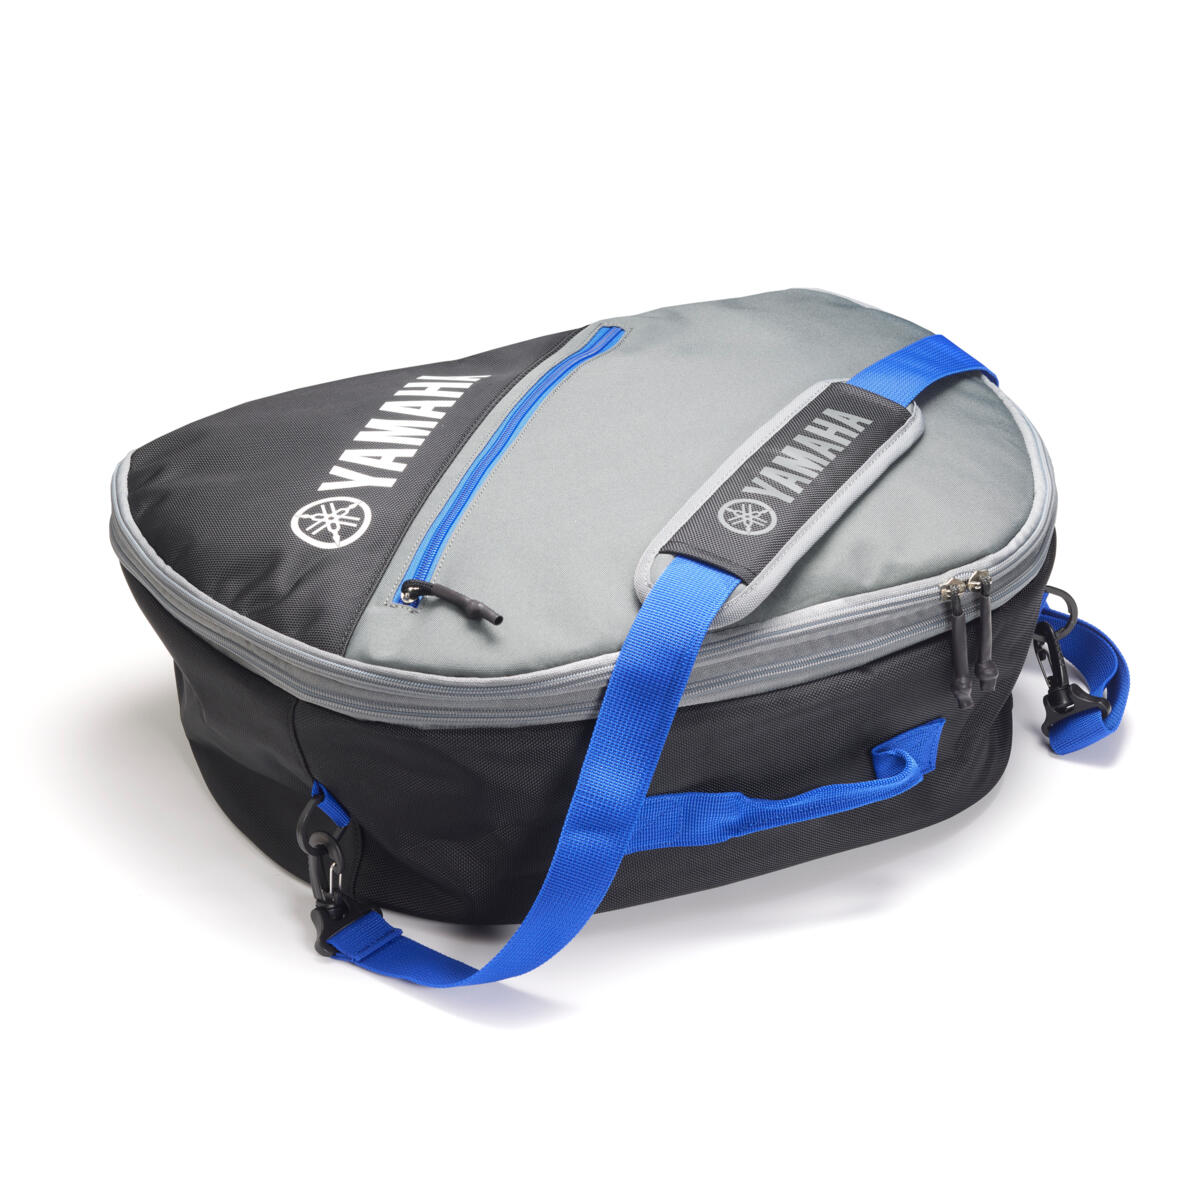 Fitted soft bag to put inside Yamaha 45L Top Case.